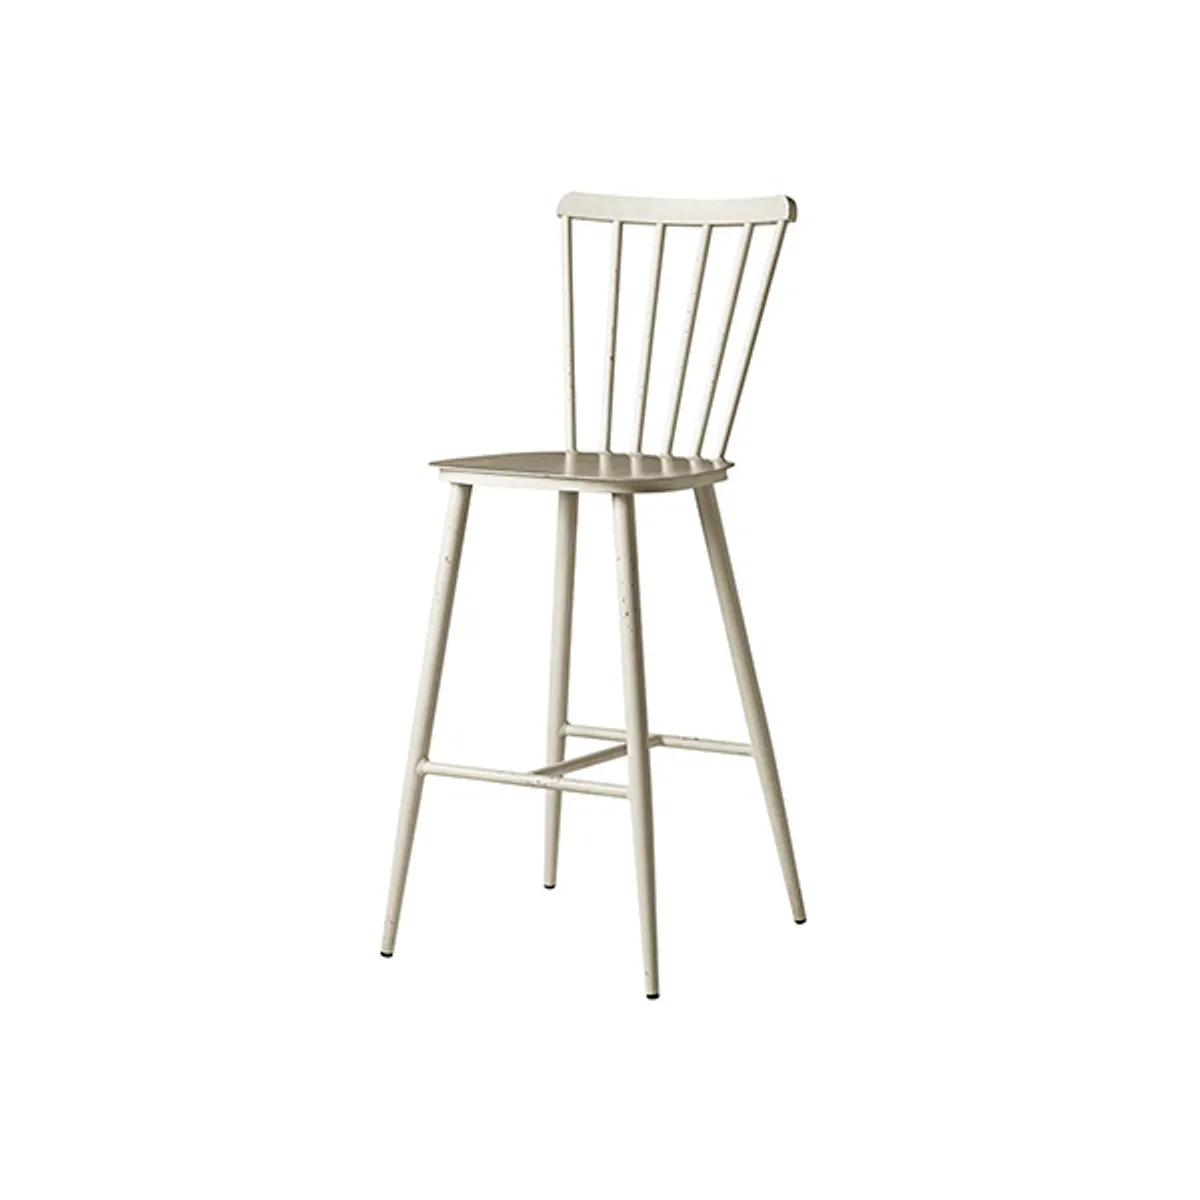 Spool Bar Stool White Inside Out Contracts